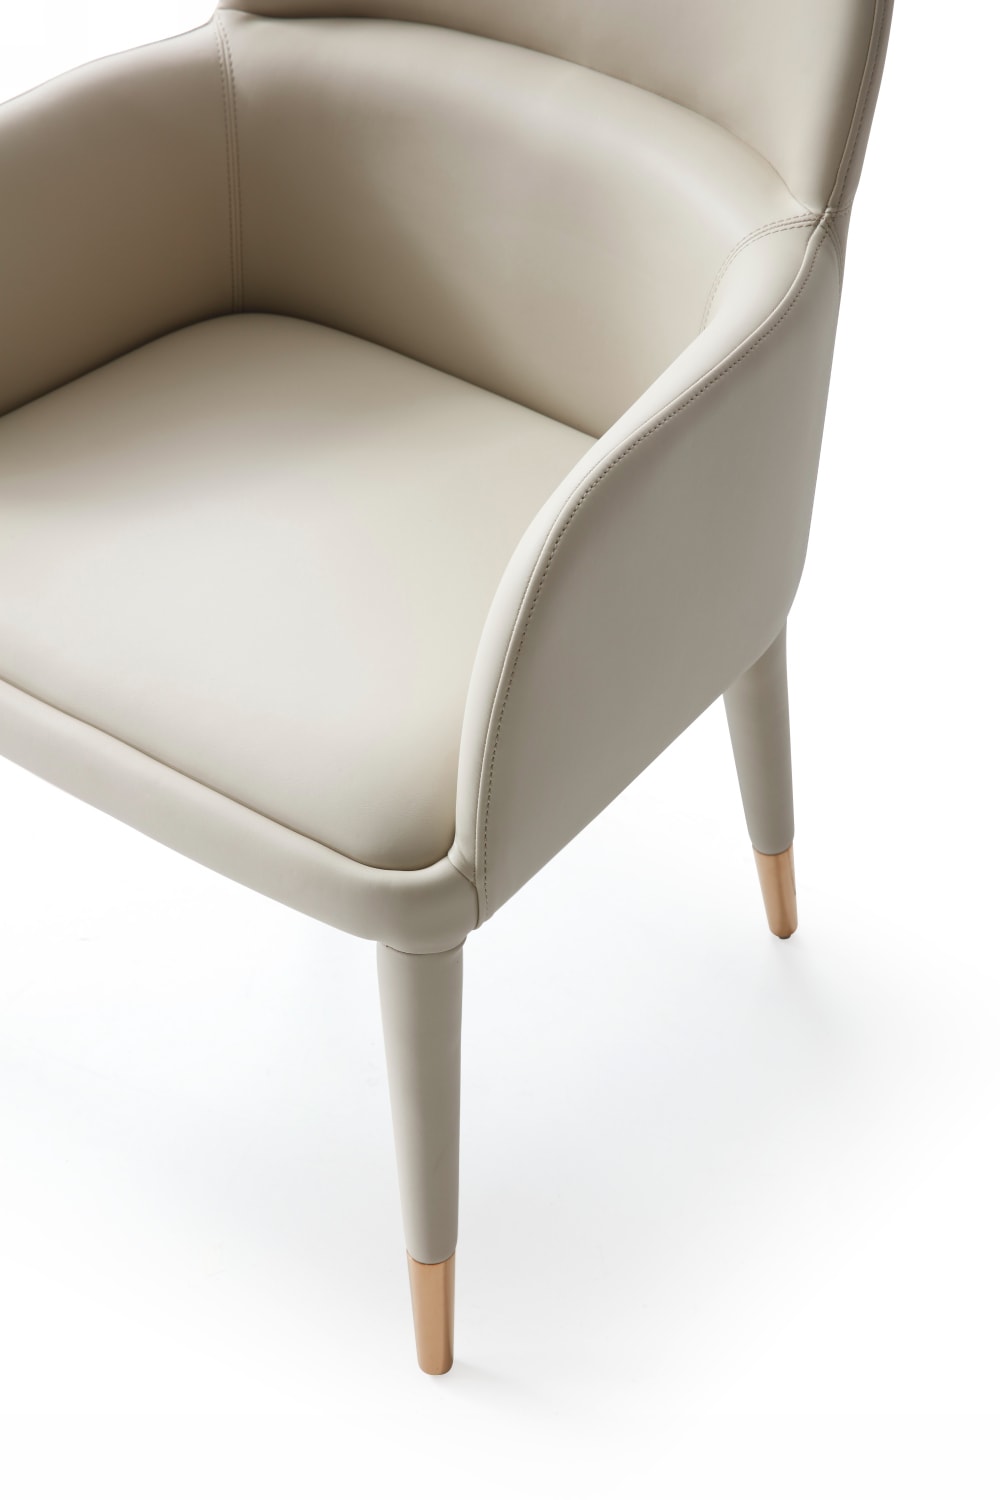 VIG Furniture Modrest Cortina Beige Leather Dining Arm Chair